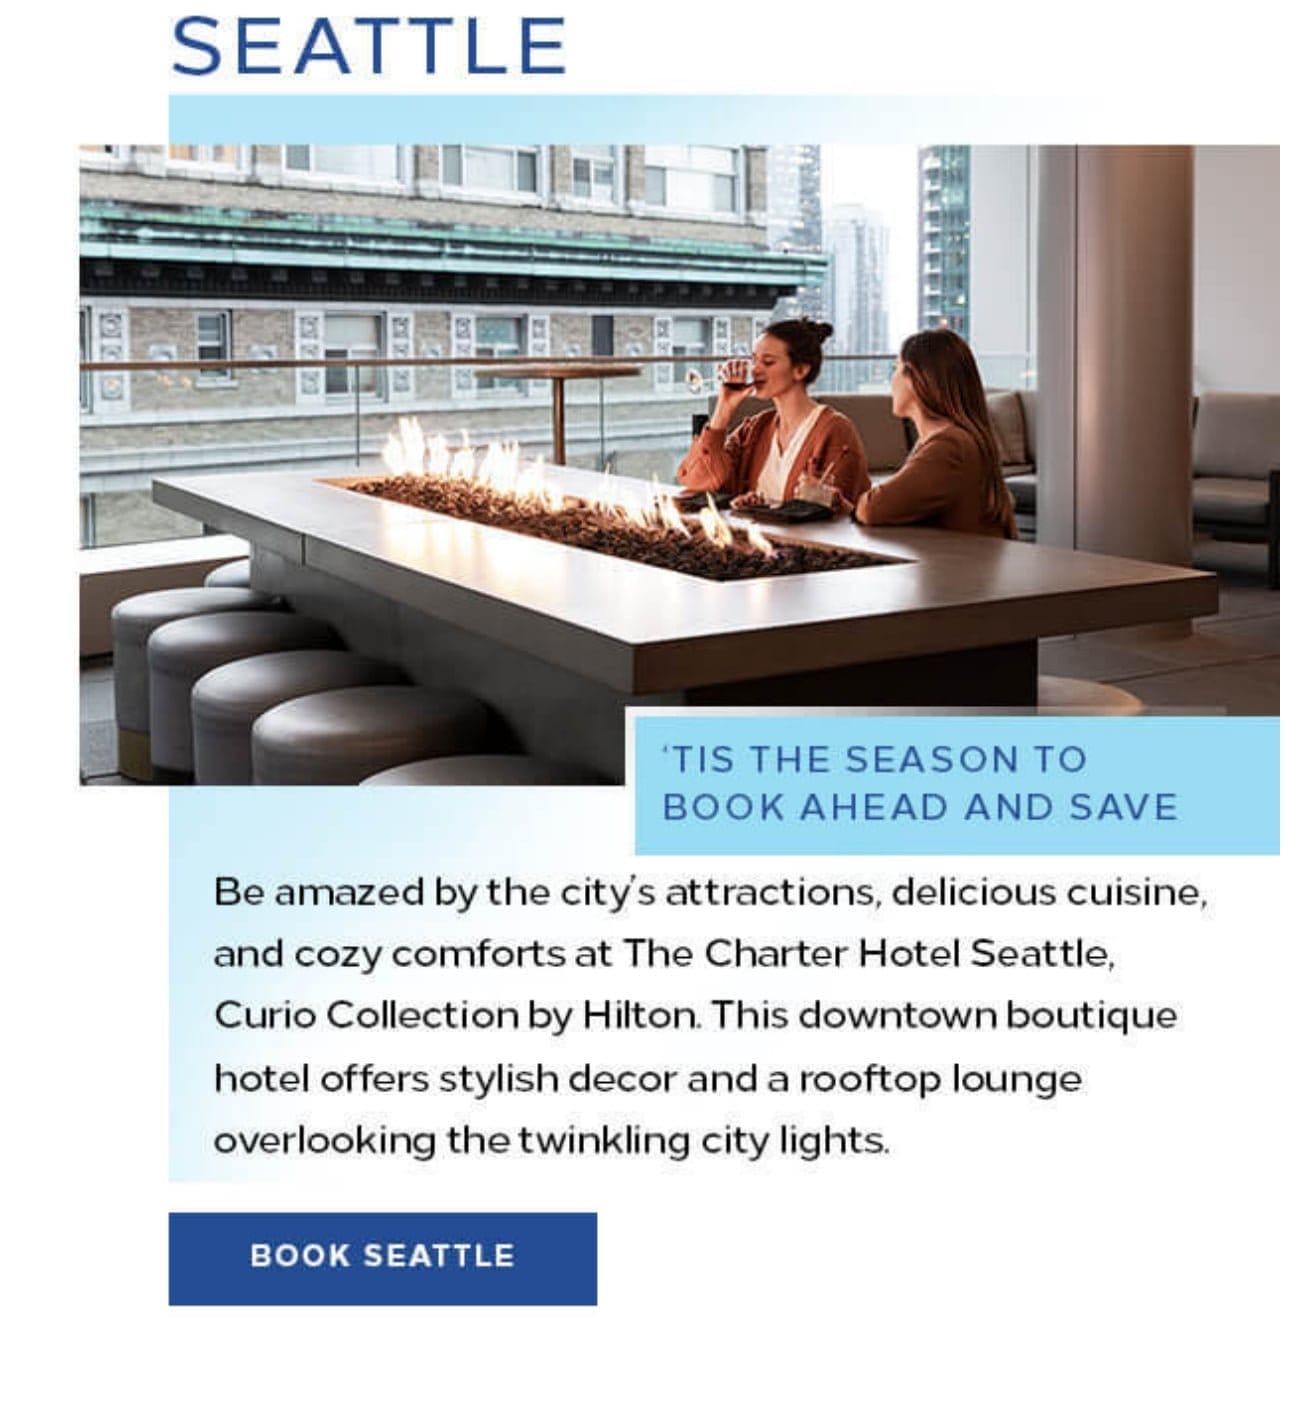  Seattle. Be amazed by the city’s attractions, delicious cuisine, and cozy comforts at The Charter Hotel Seattle, Curio Collection by Hilton. This downtown boutique hotel offers stylish decor and a rooftop lounge overlooking the twinkling city lights. Book Seattle. 